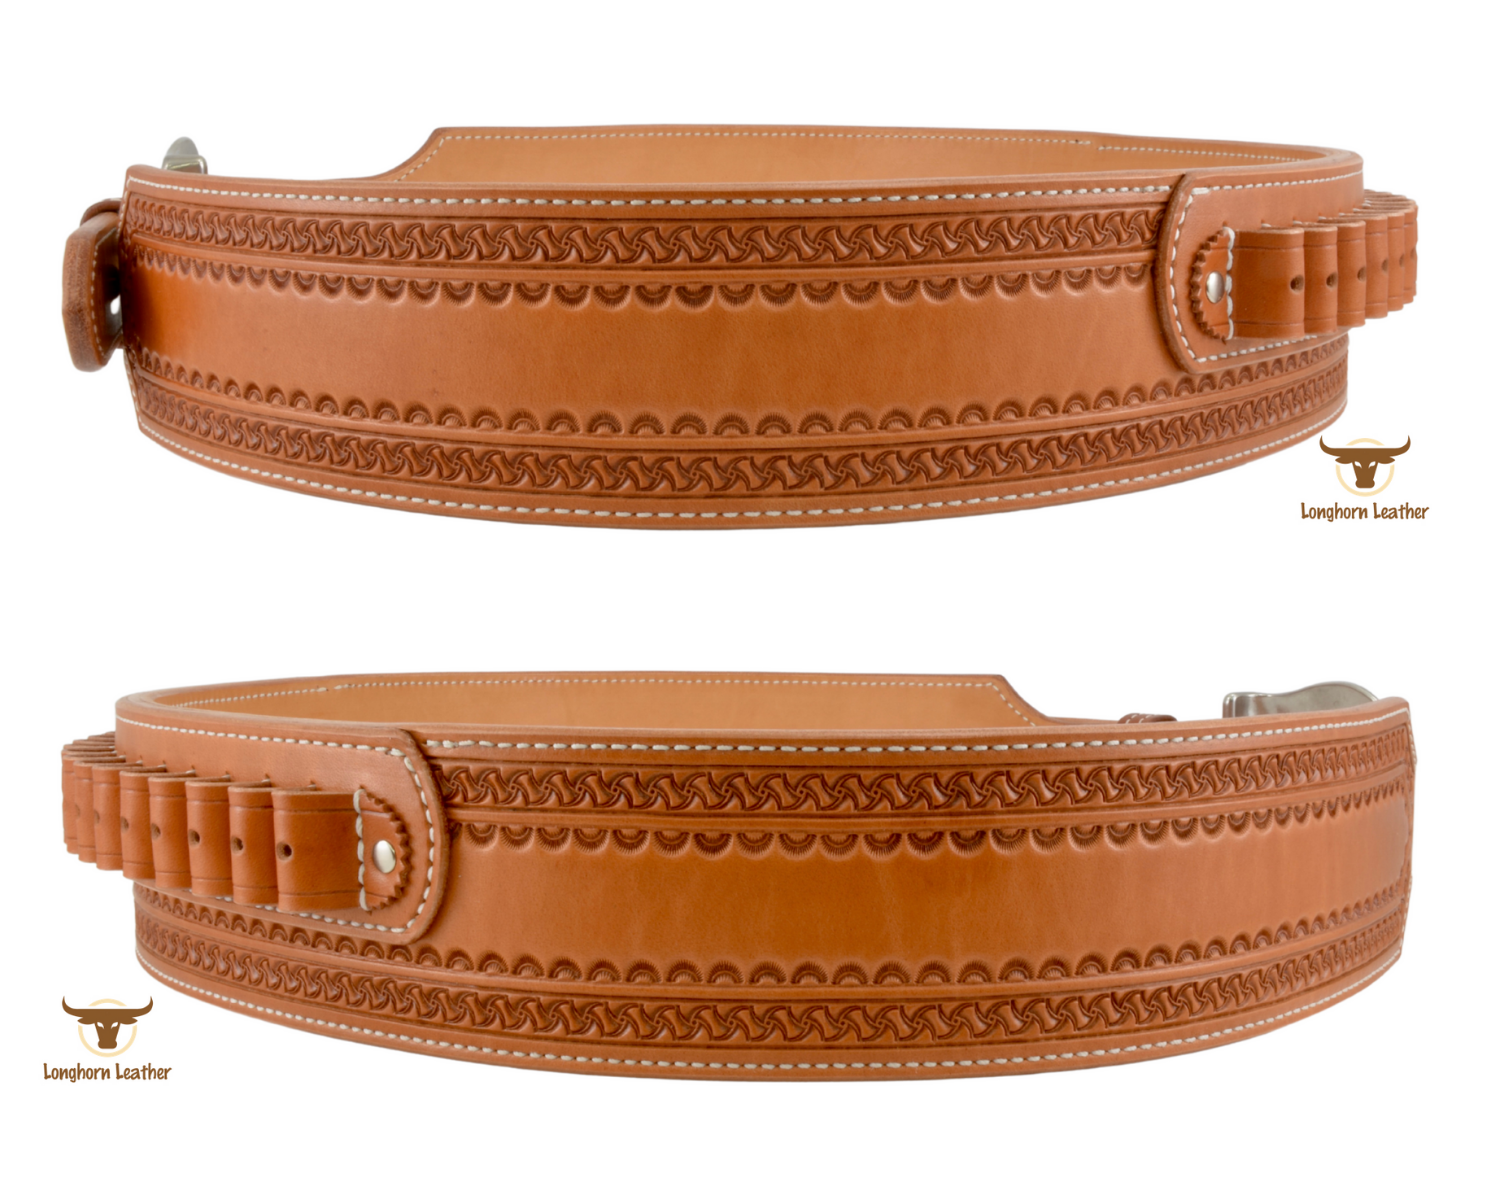 Custom leather cartridge belt featuring the "Kingman" design.  Individually handcrafted at Longhorn Leather AZ.